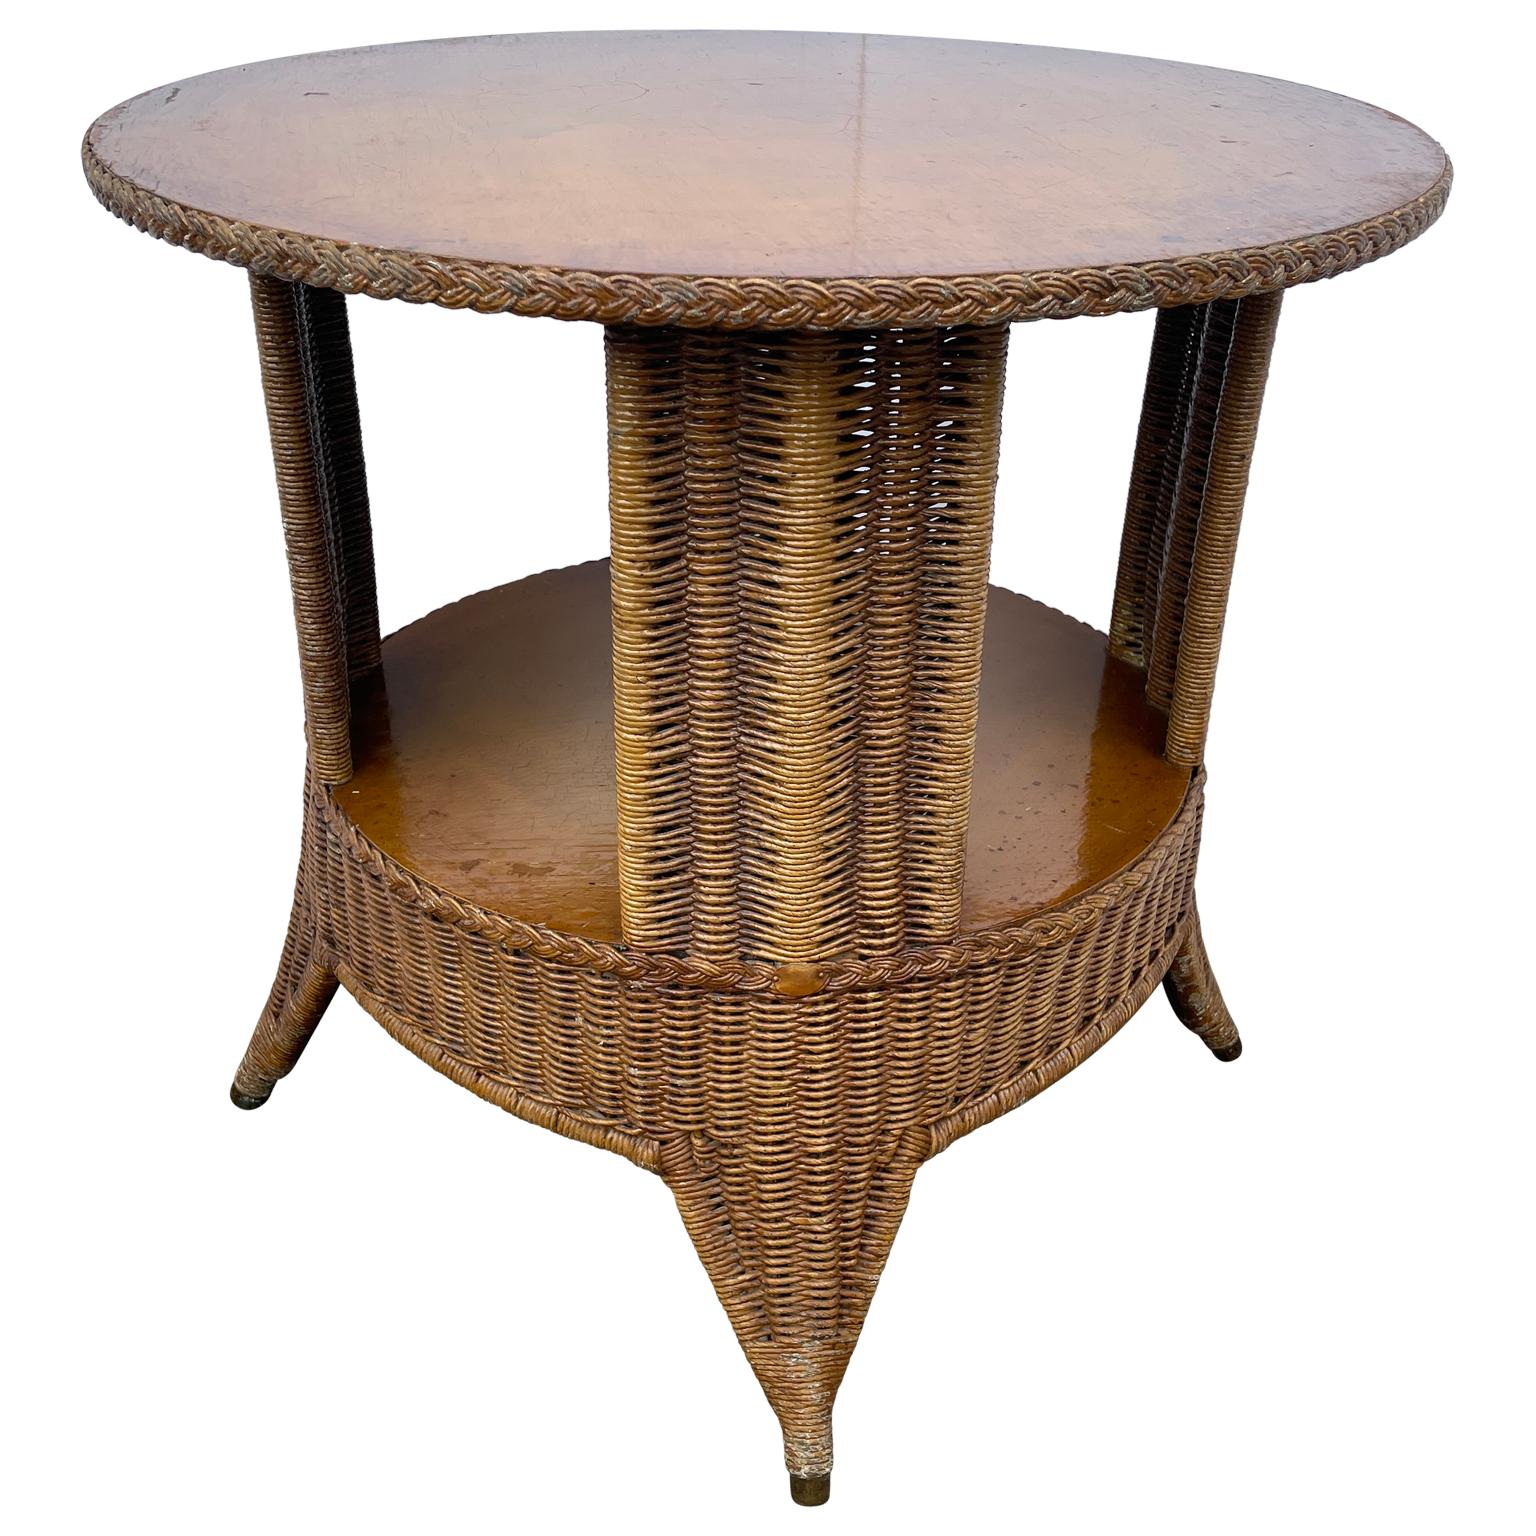 Mid-Century Modern wicker and wood two-tier round end table. Vintage round table is sturdy and an excellent choice for anchoring a large sofa or between two chairs. With it's height it can also be used as a cocktail table or foyer piece. The table